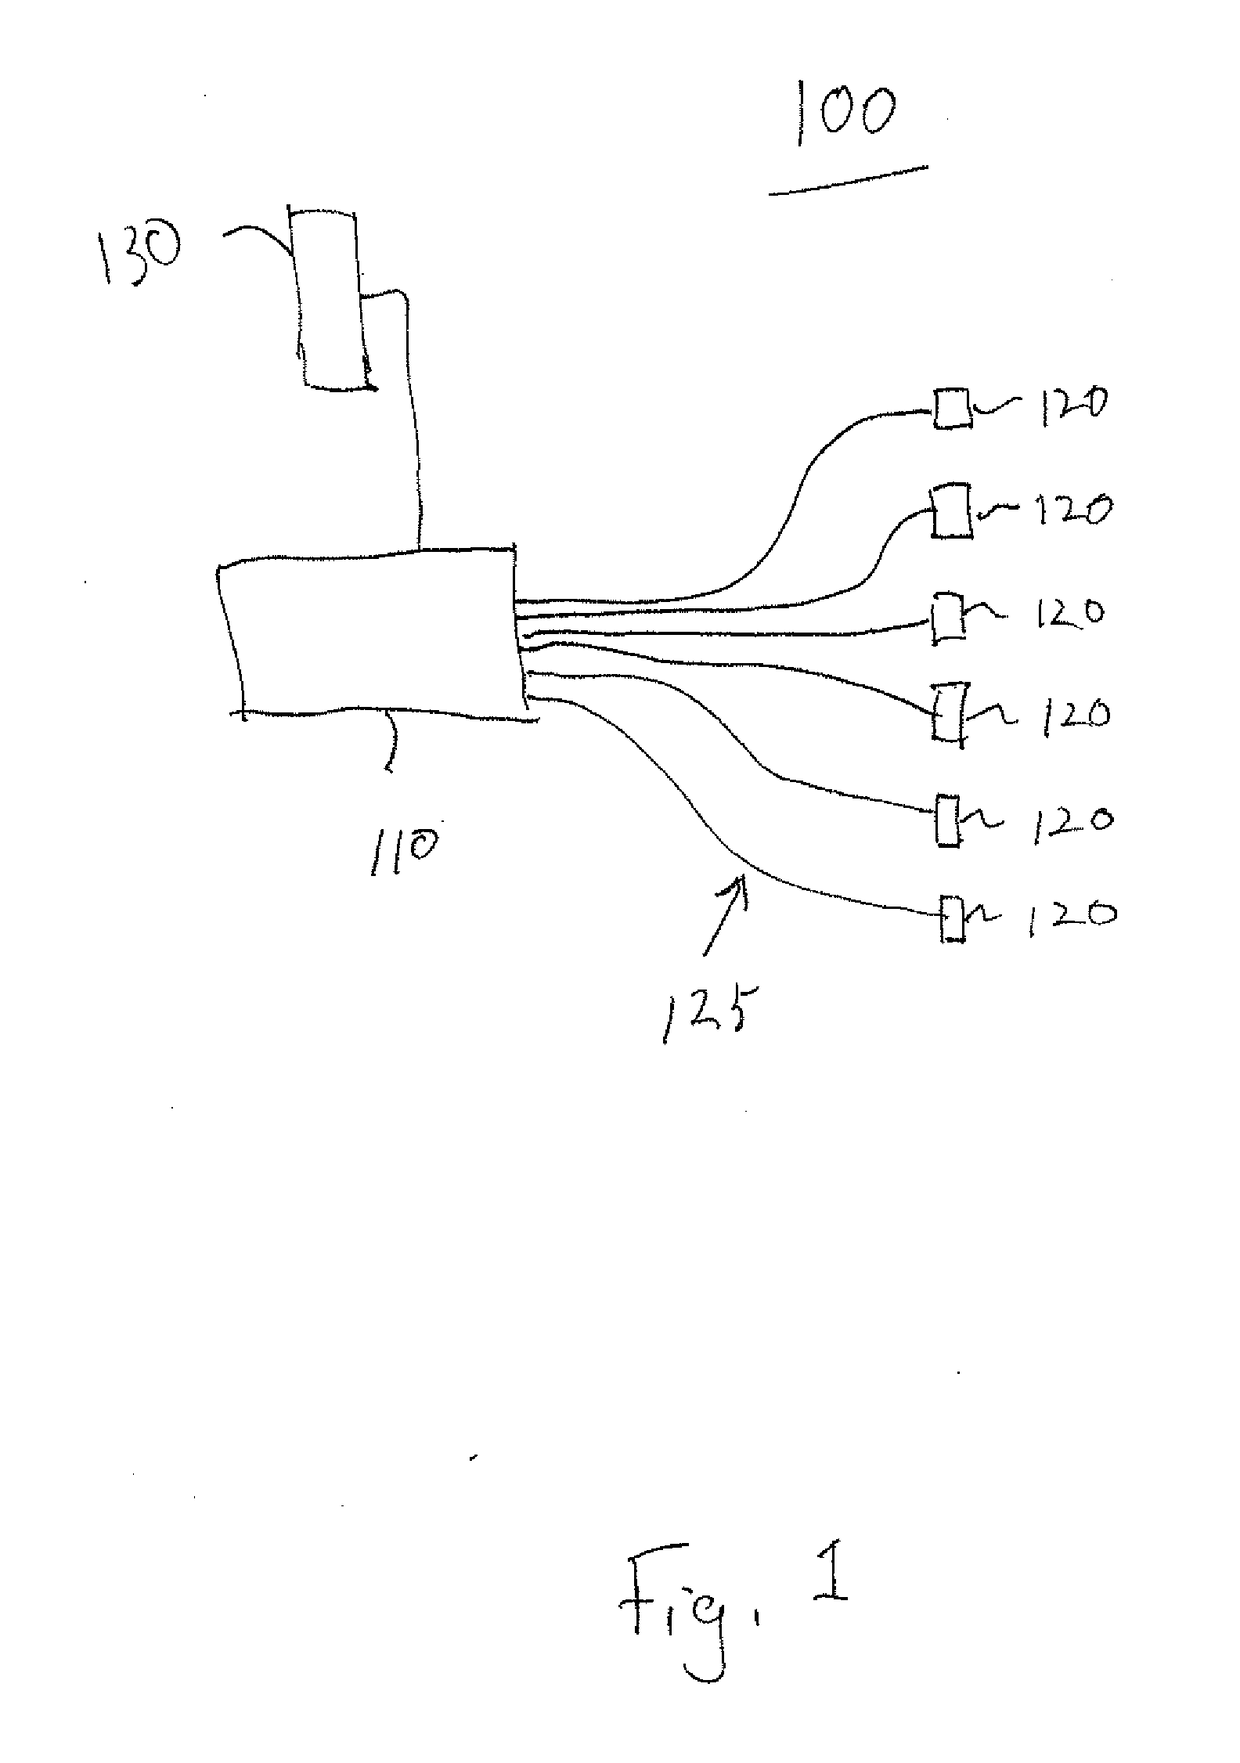 Neuromuscular Stimulation System and Method